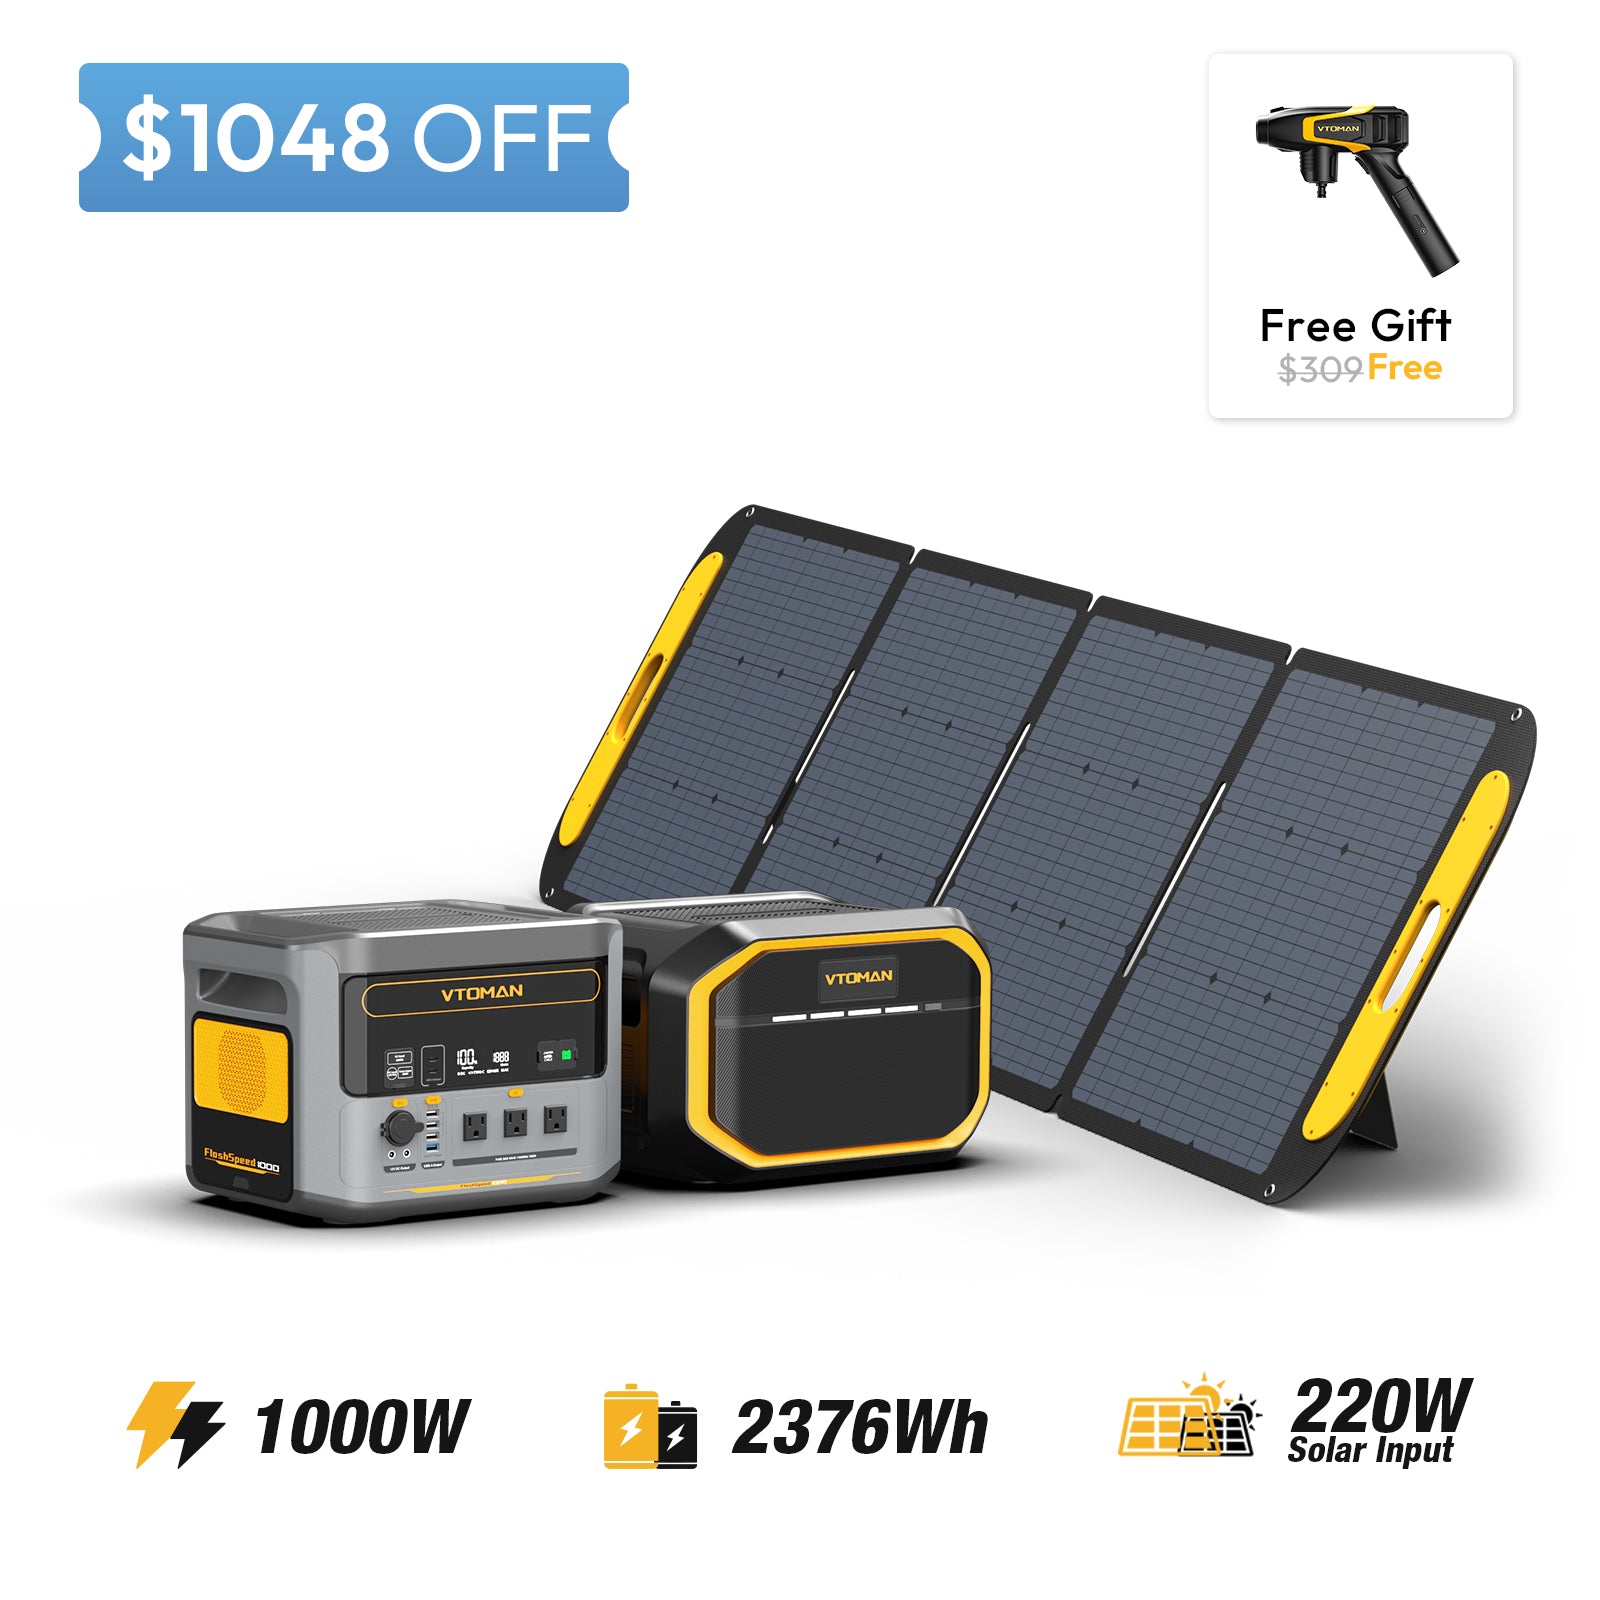 FlashSpeed 1000 and 1548Wh extra battery and 220w solar panelsave $1048 in summer sale